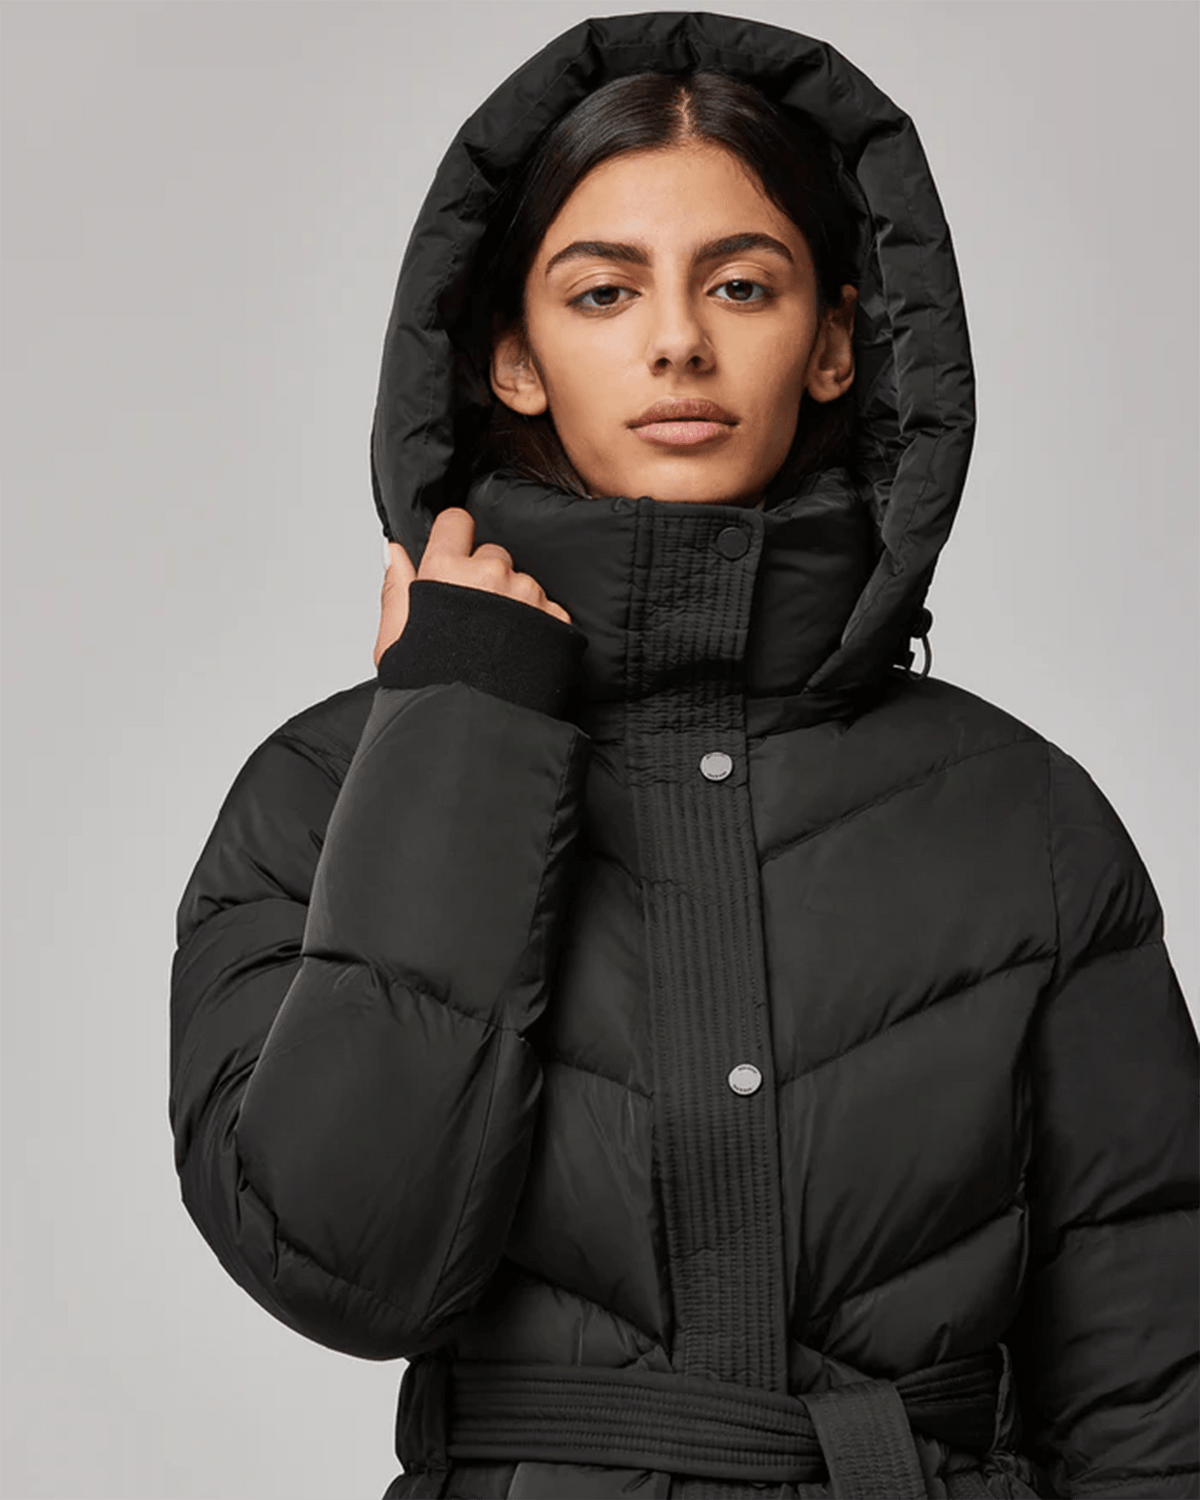 Soia & Kyo Outerwear Bryanna Semi-Fitted Knee-Length Puffer in Black